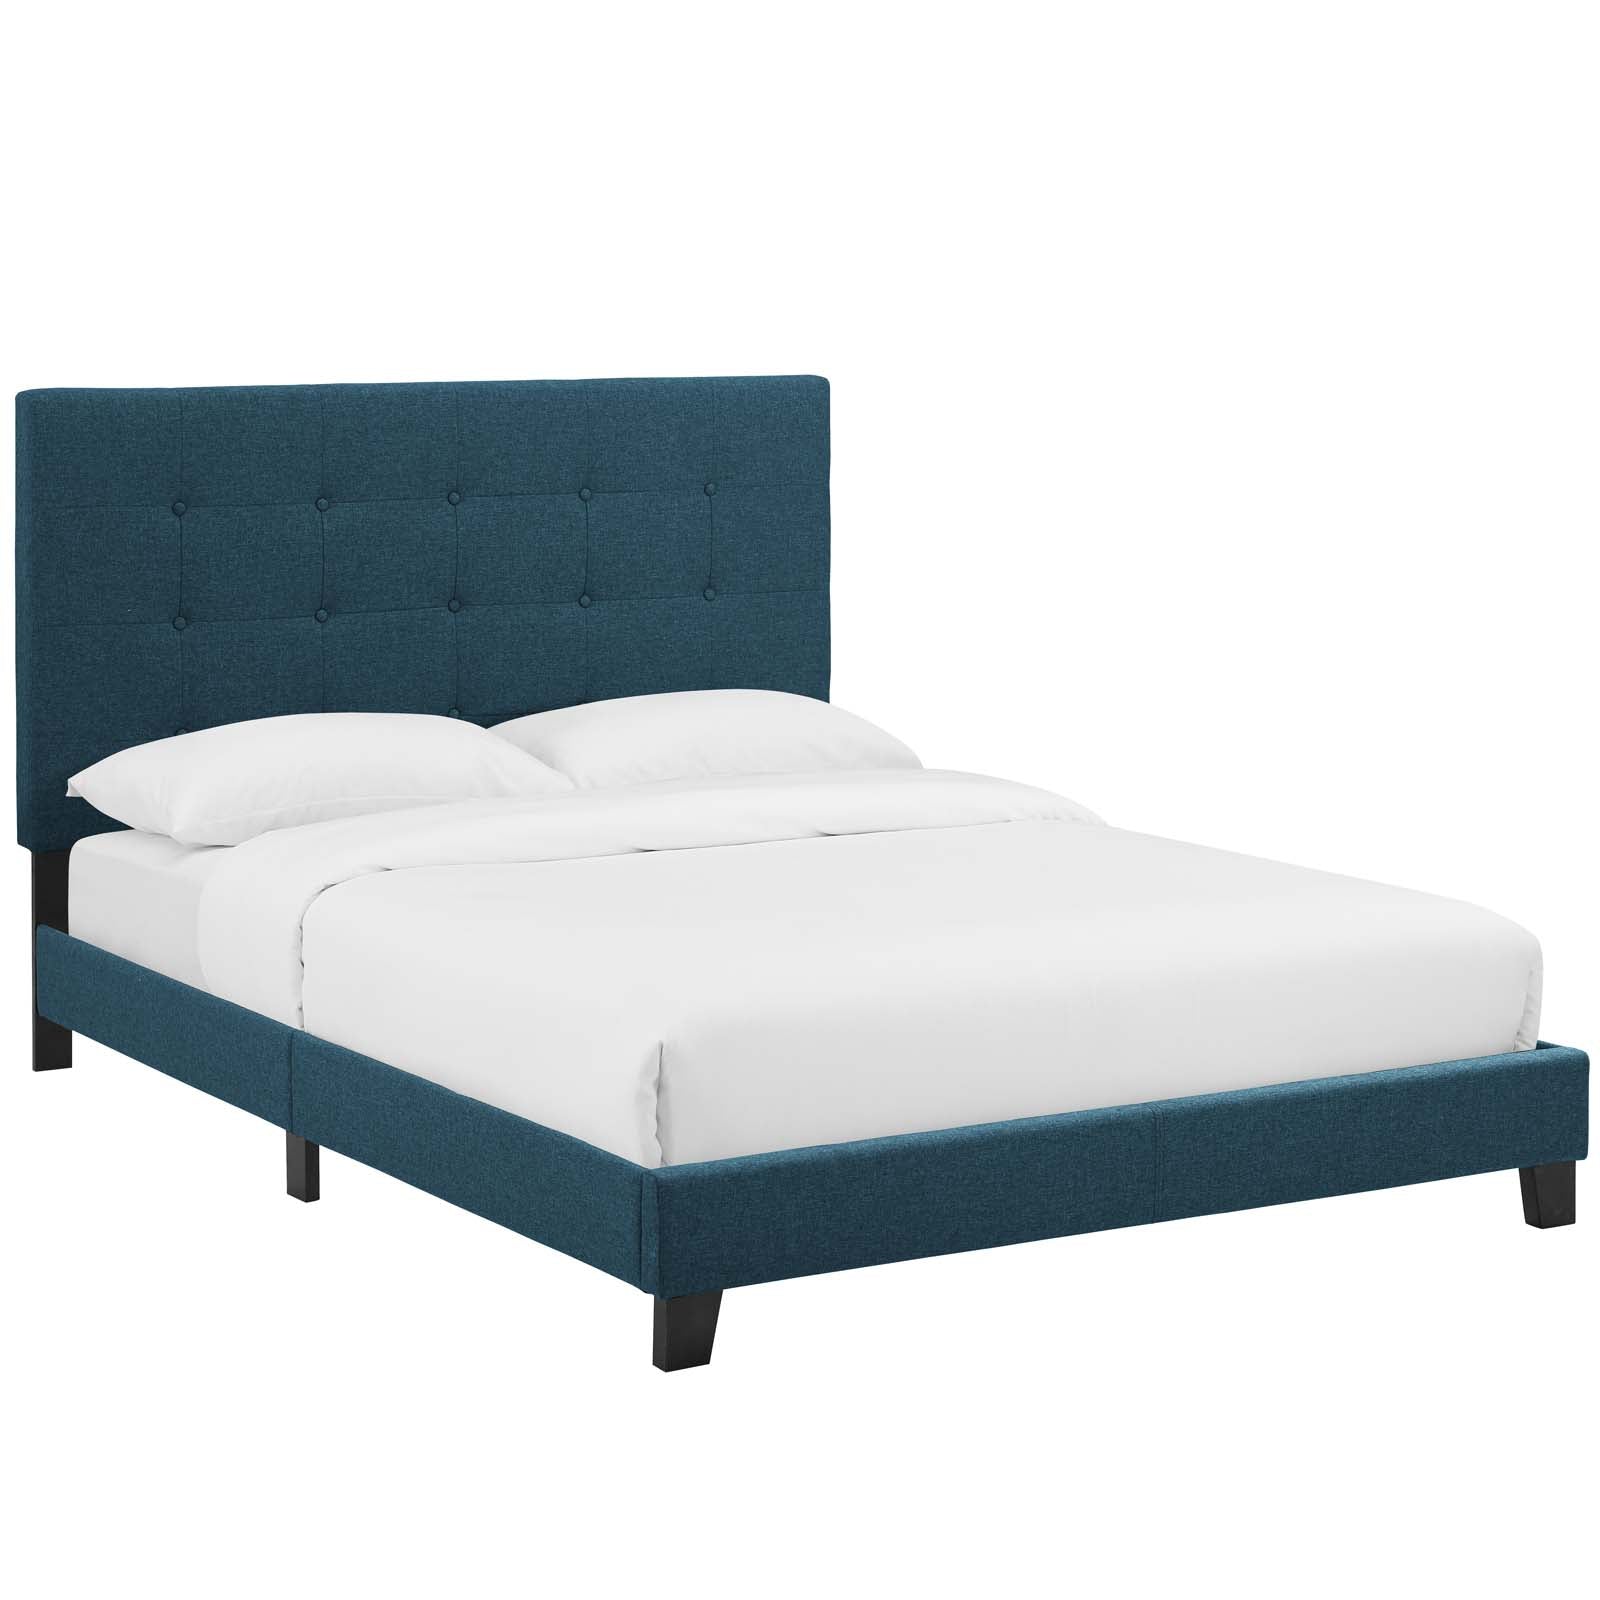 Melanie Queen Tufted Button Upholstered Fabric Platform Bed - East Shore Modern Home Furnishings